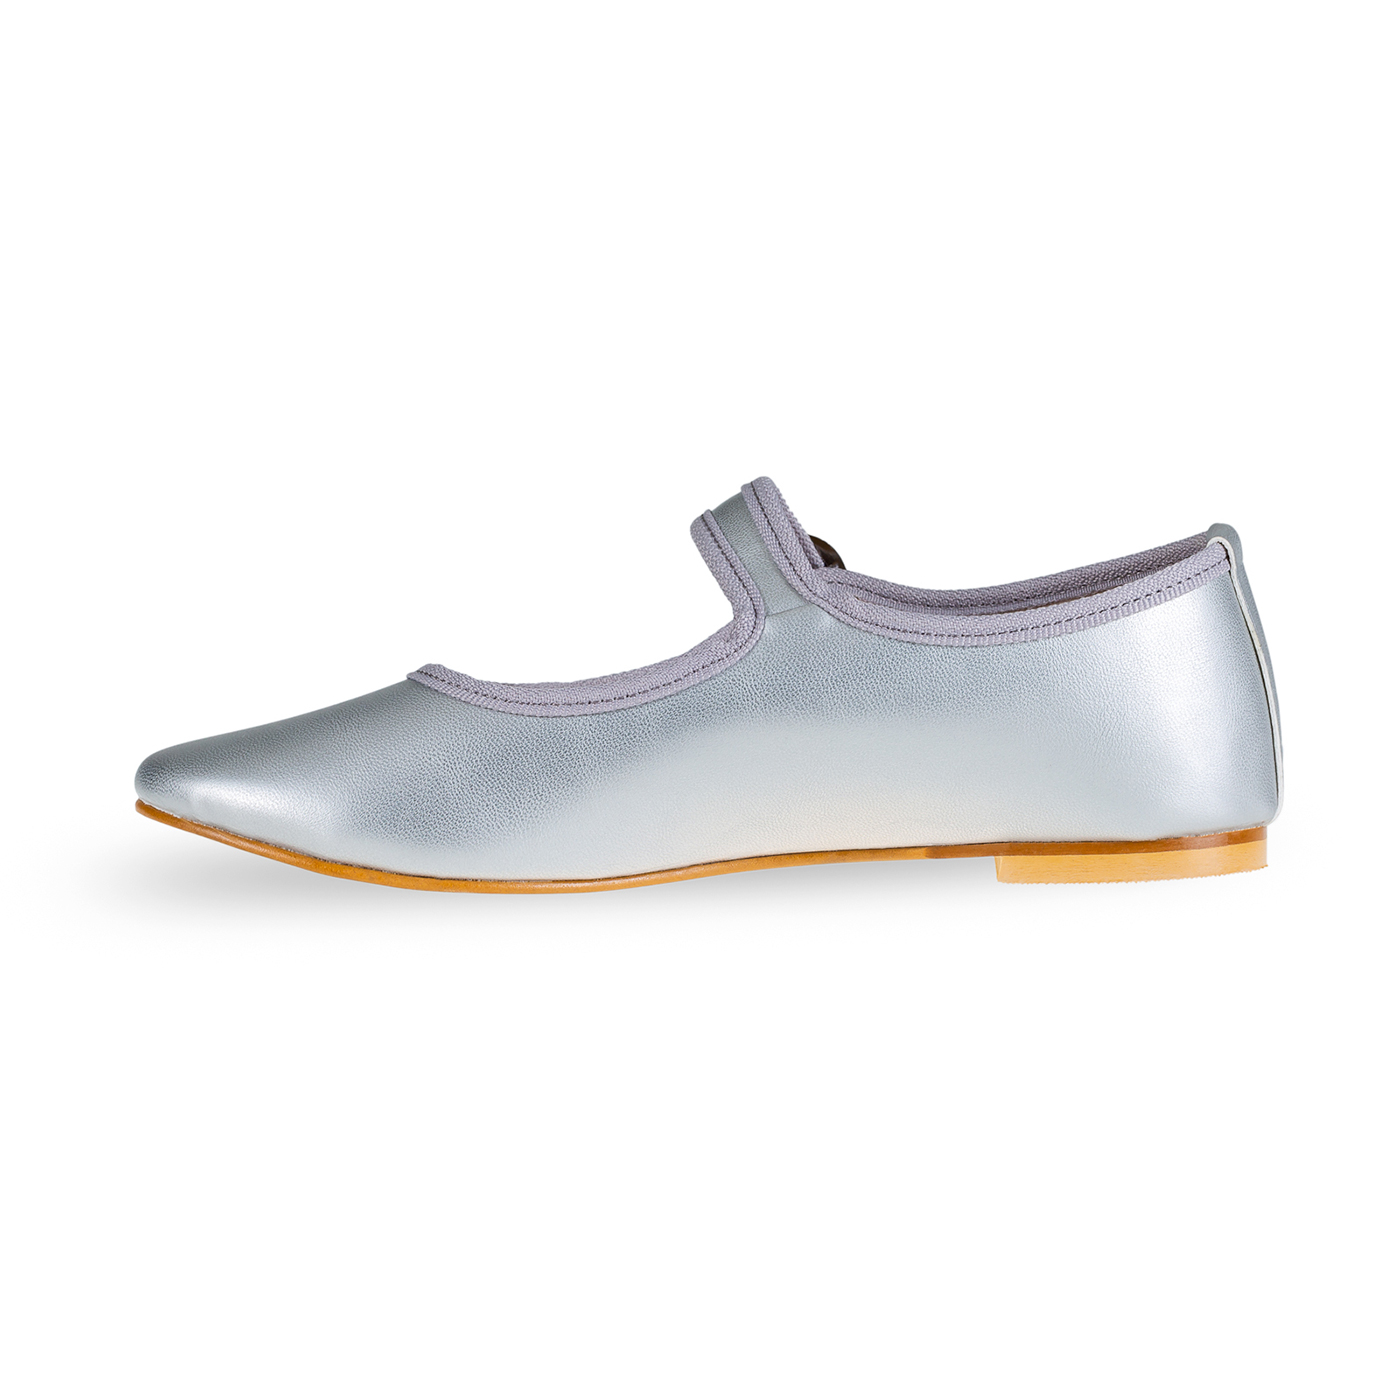 MOI SHOES Moi Shoes Mary Jane Babet | Silver